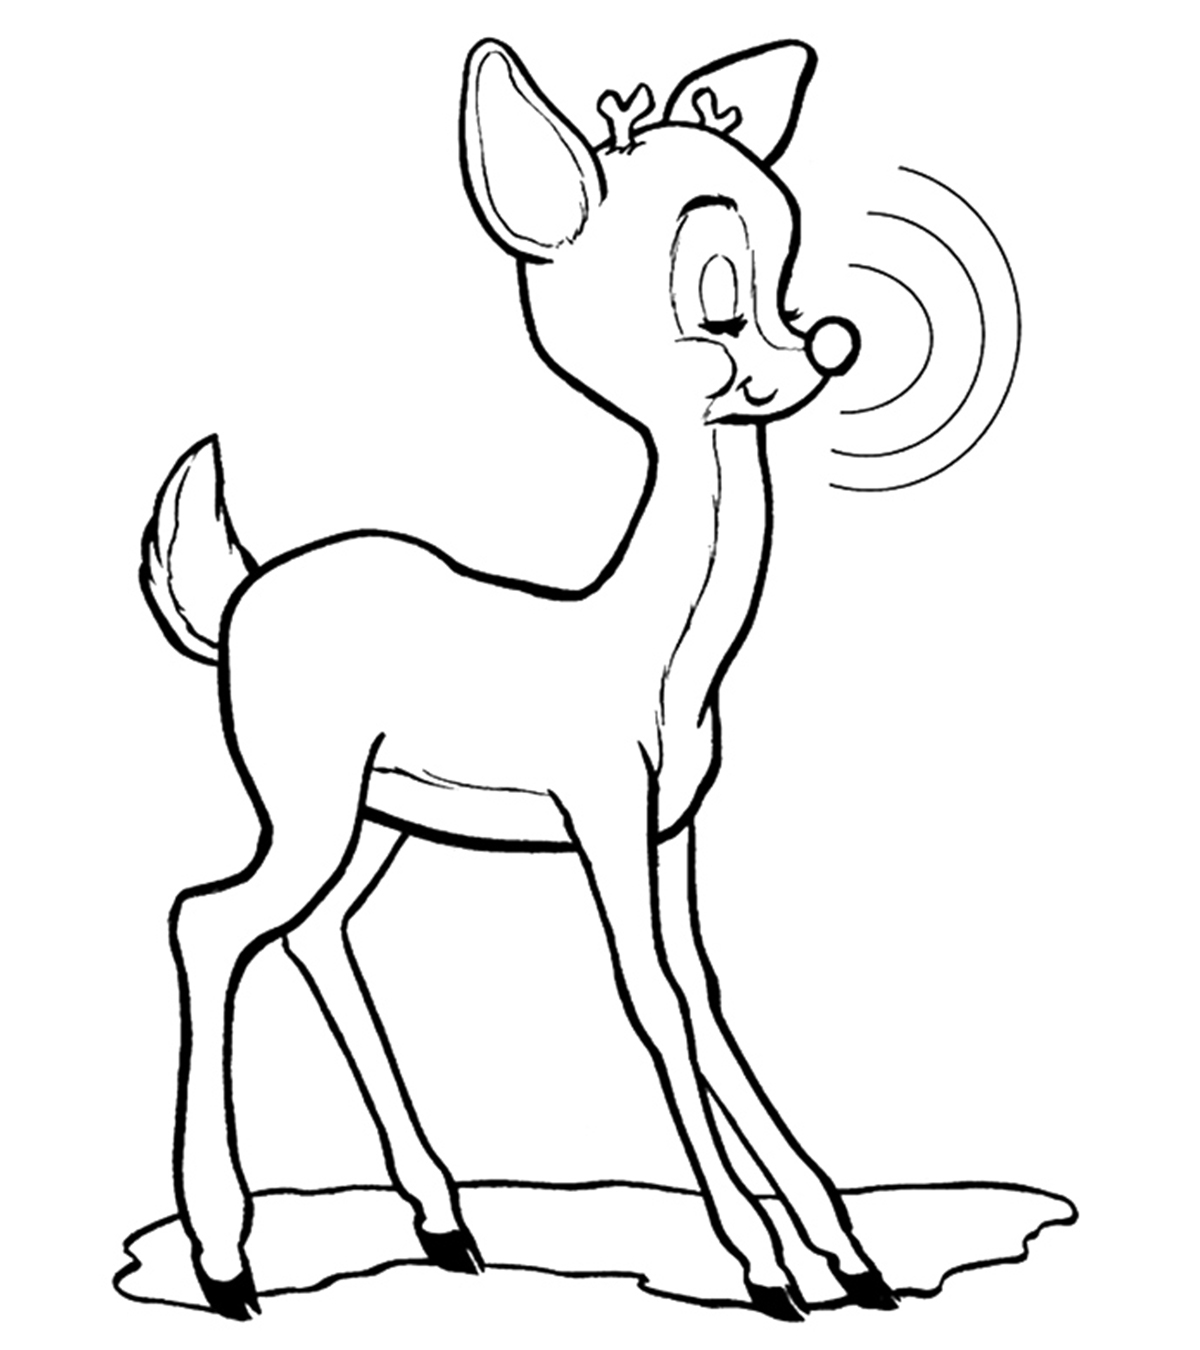 Santa And Rudolph Coloring Pages Coloring Book Reindeer Coloring Pages Image Ideas Christmas For